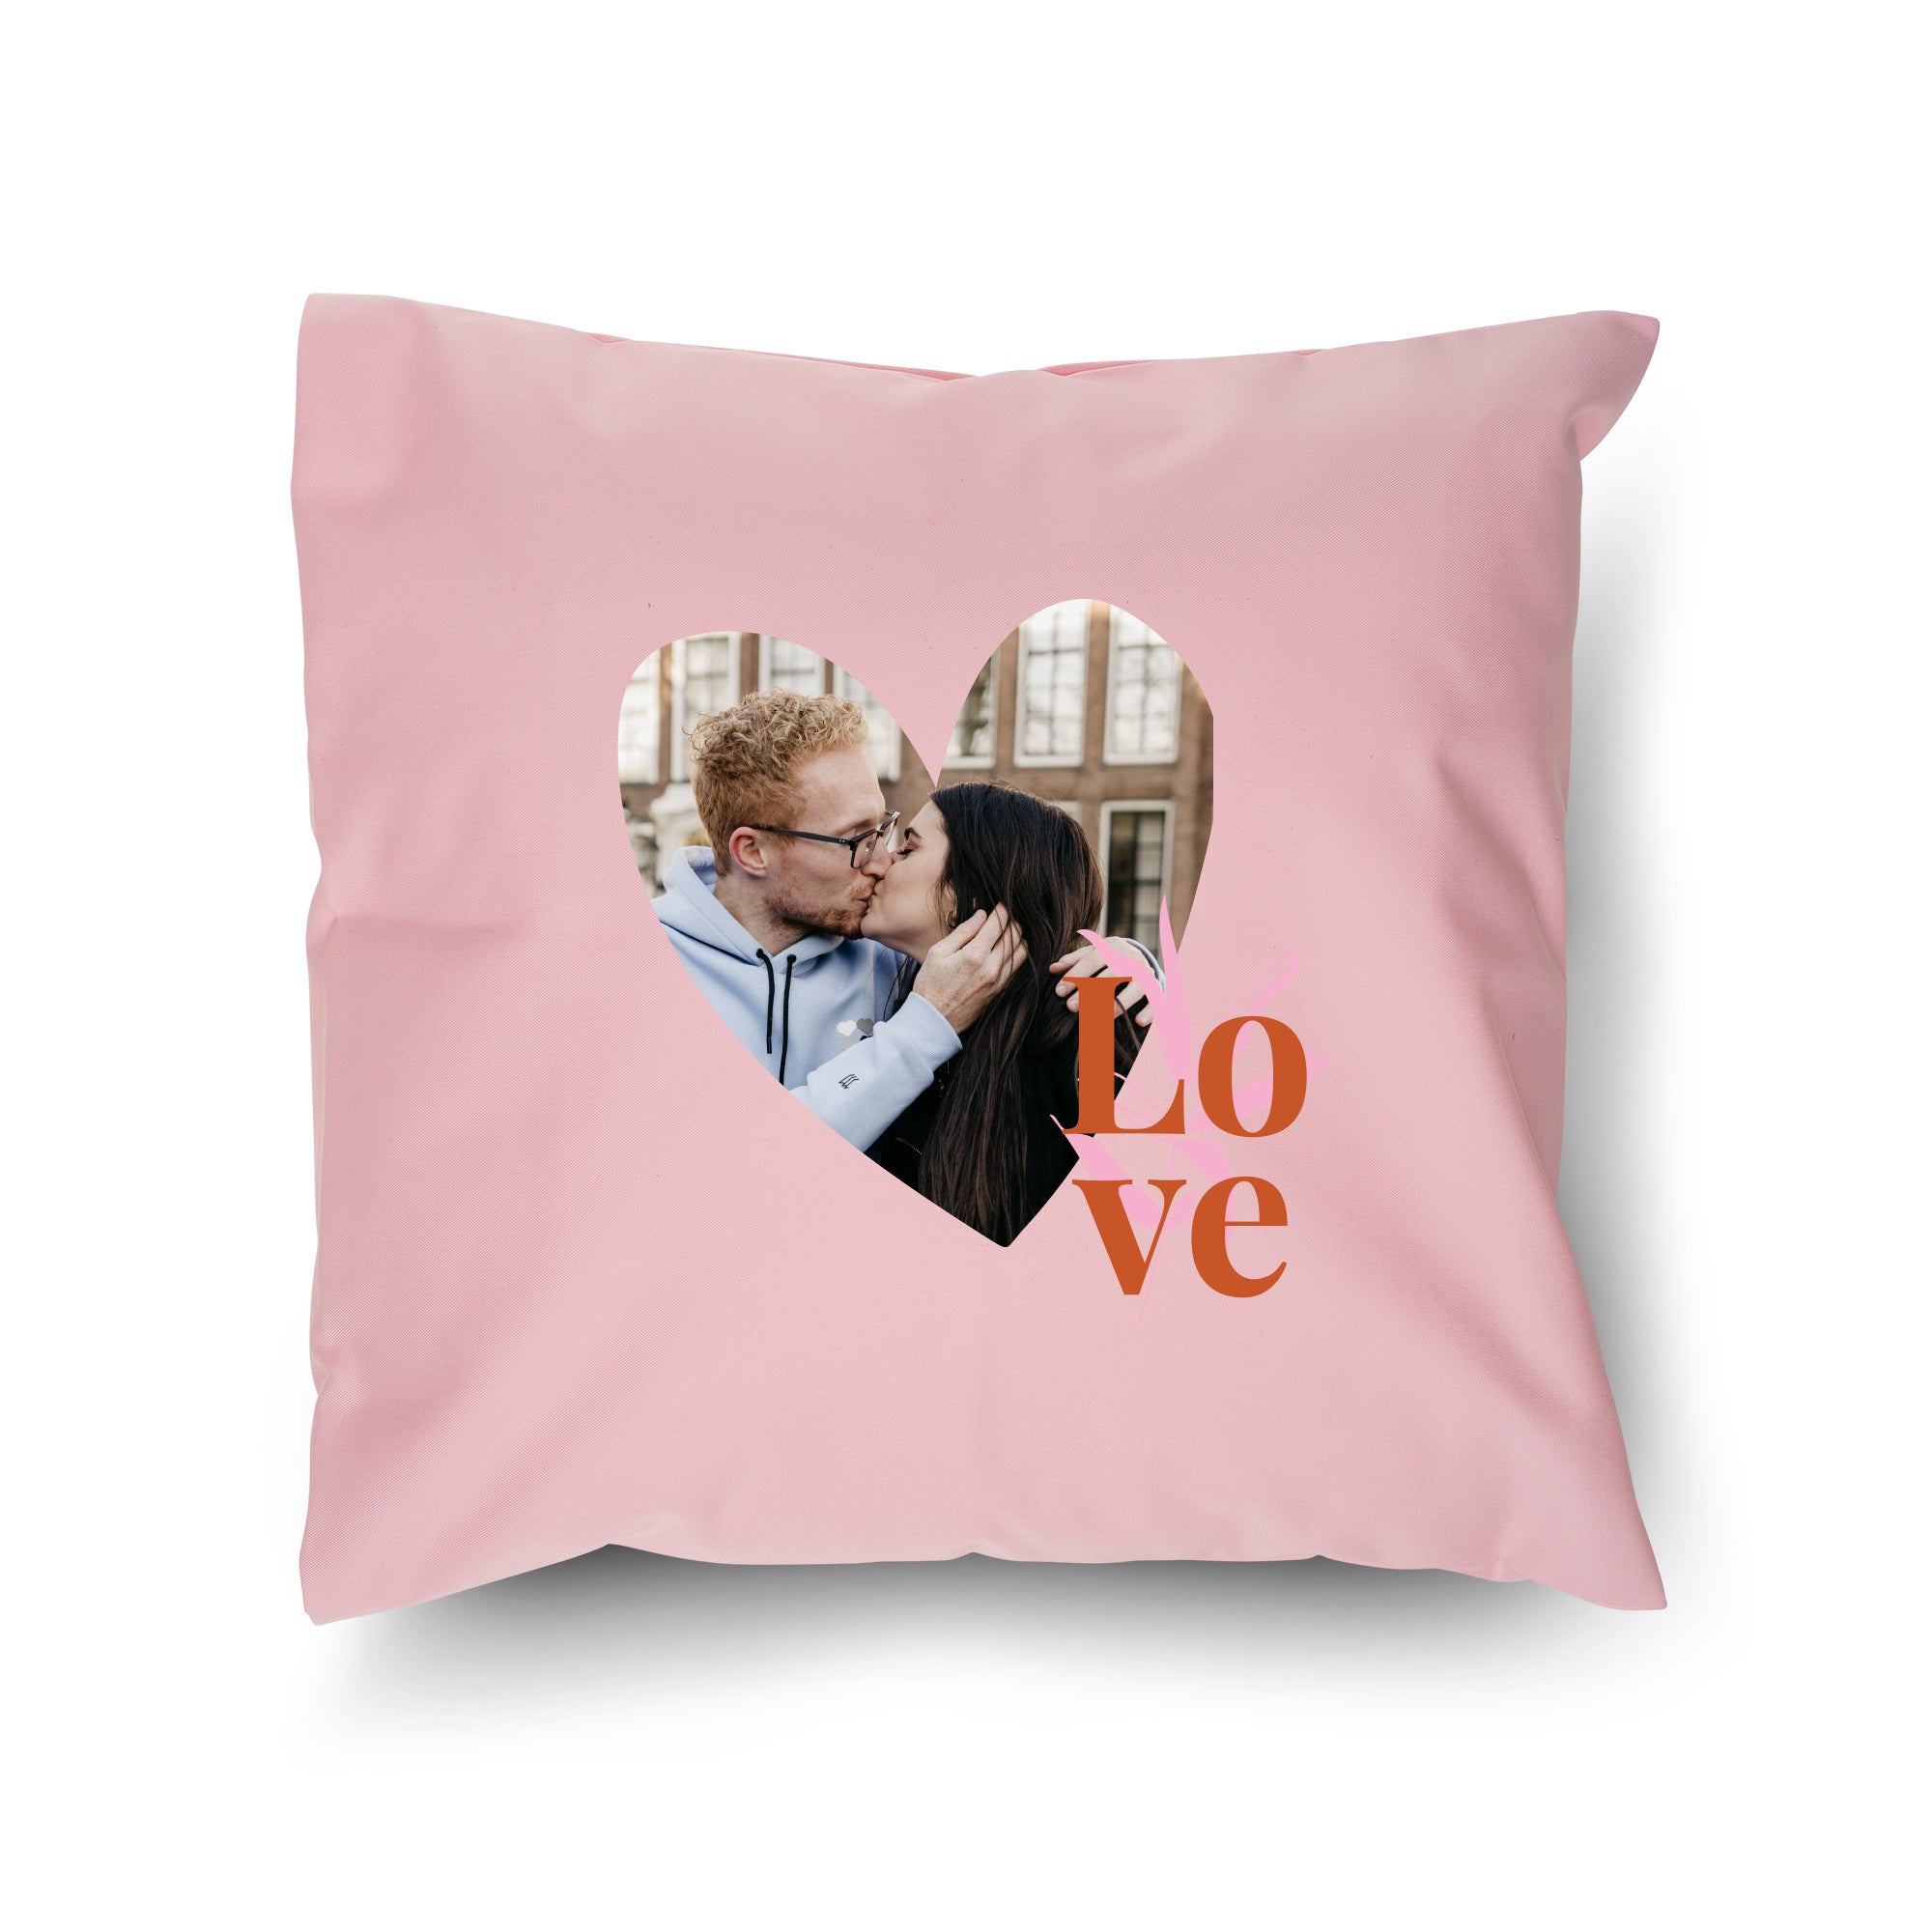 Personalised Cushion Case - Small - Pink